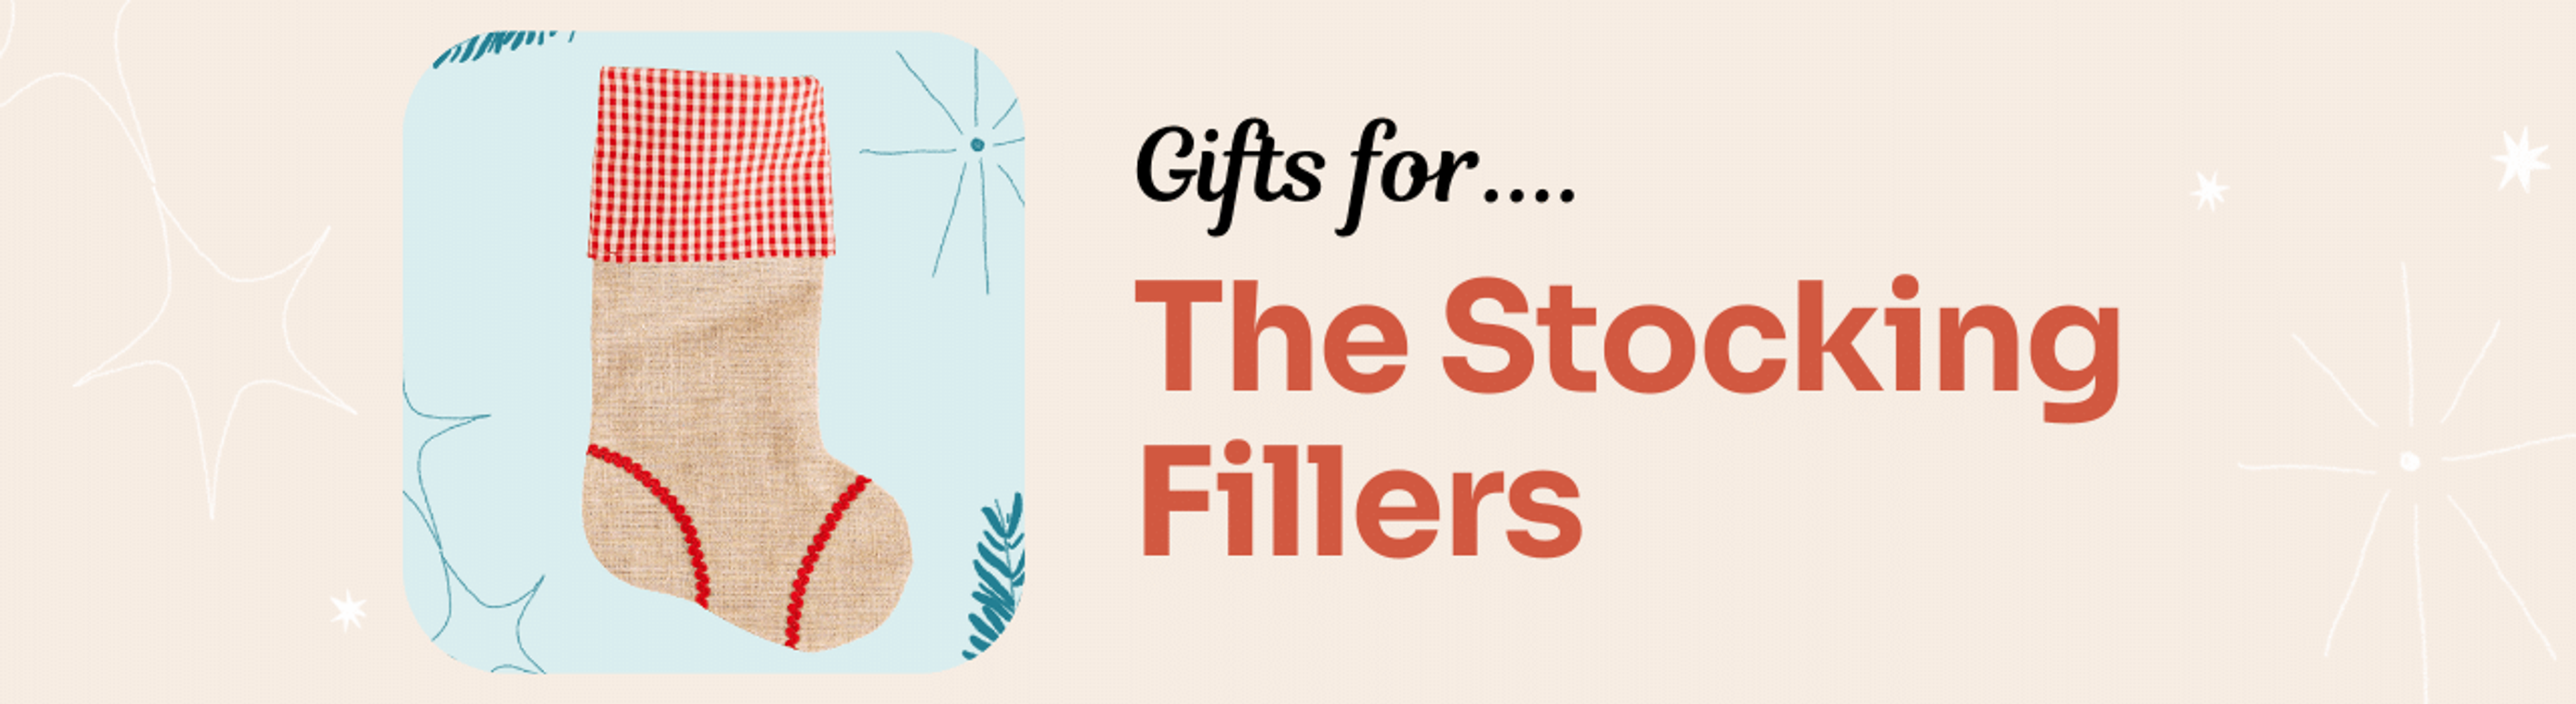 Gifts for The Stocking Fillers